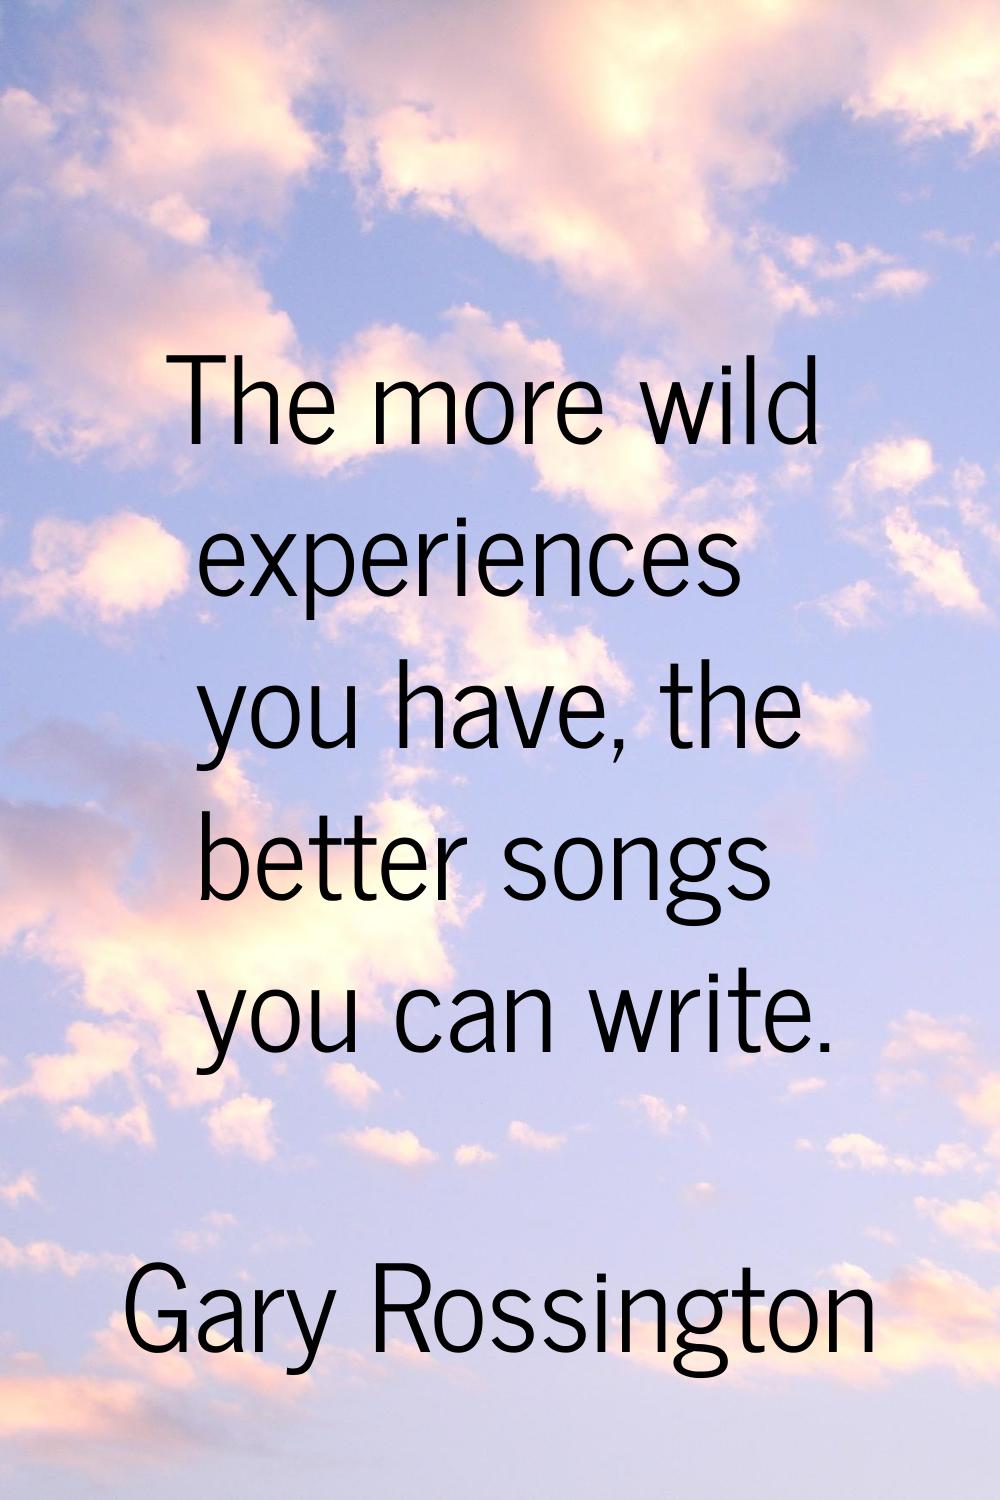 The more wild experiences you have, the better songs you can write.